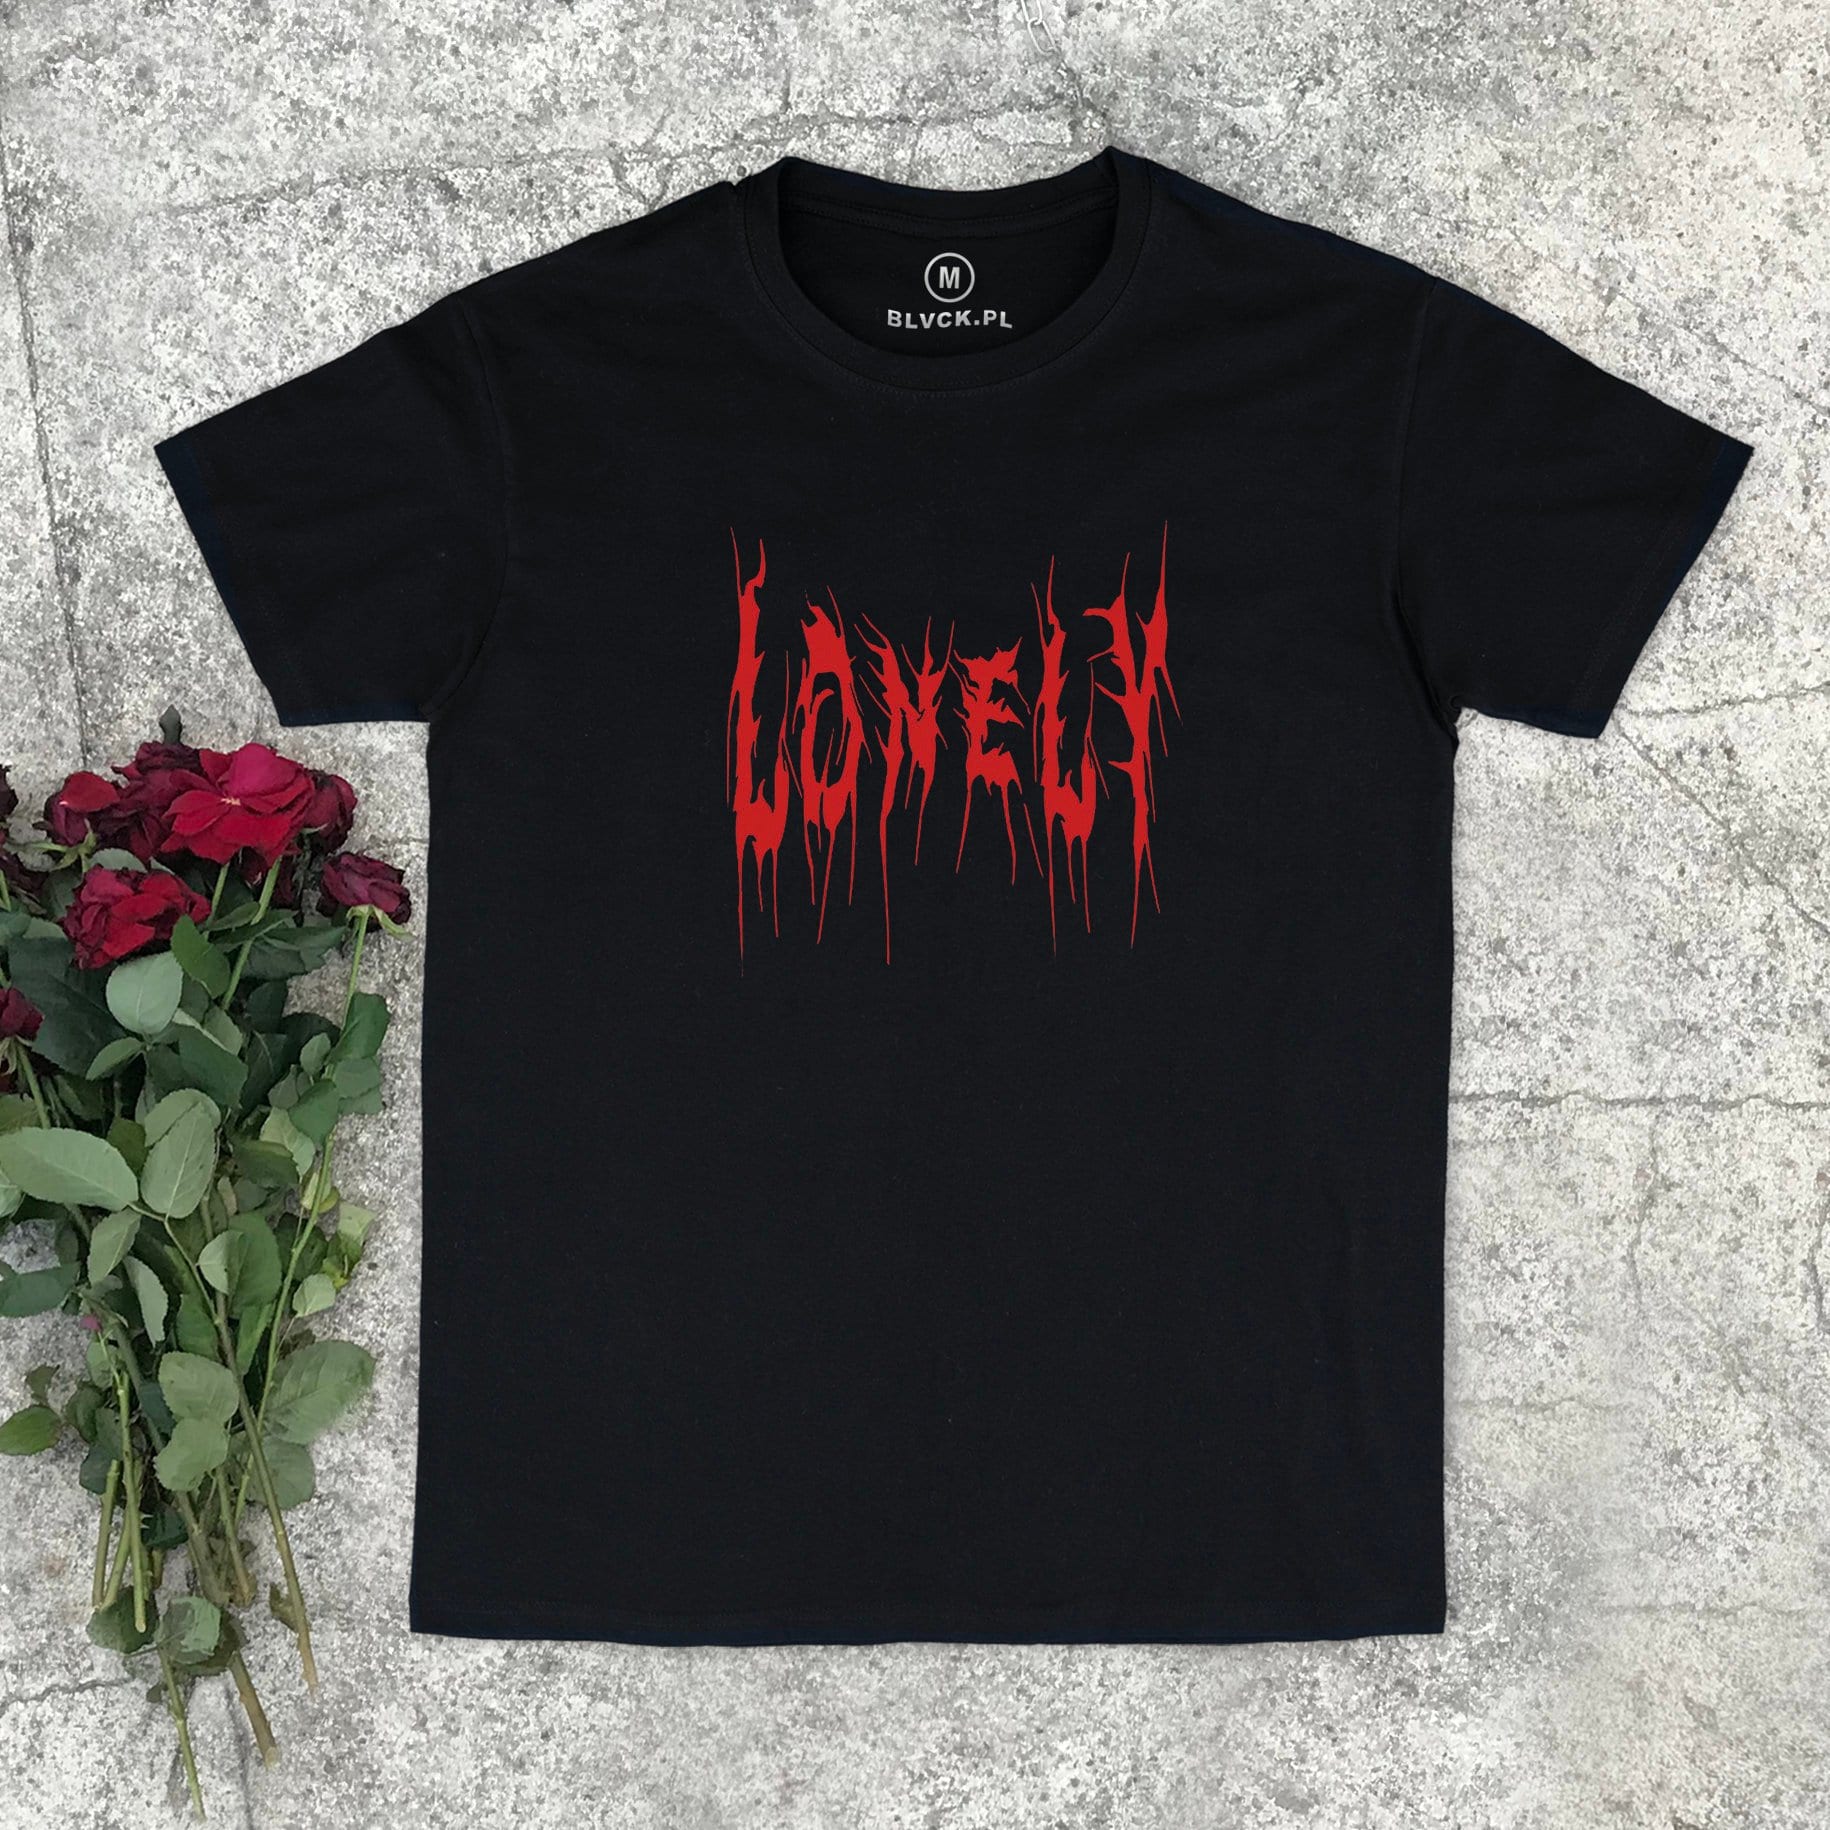 Aesthetic Lonely Shirt Aesthetic Clothing Tumblr Shirt Aesthetic Shirt Tumblr Clothing Grunge Shirt Grunge Clothing Goth Indie